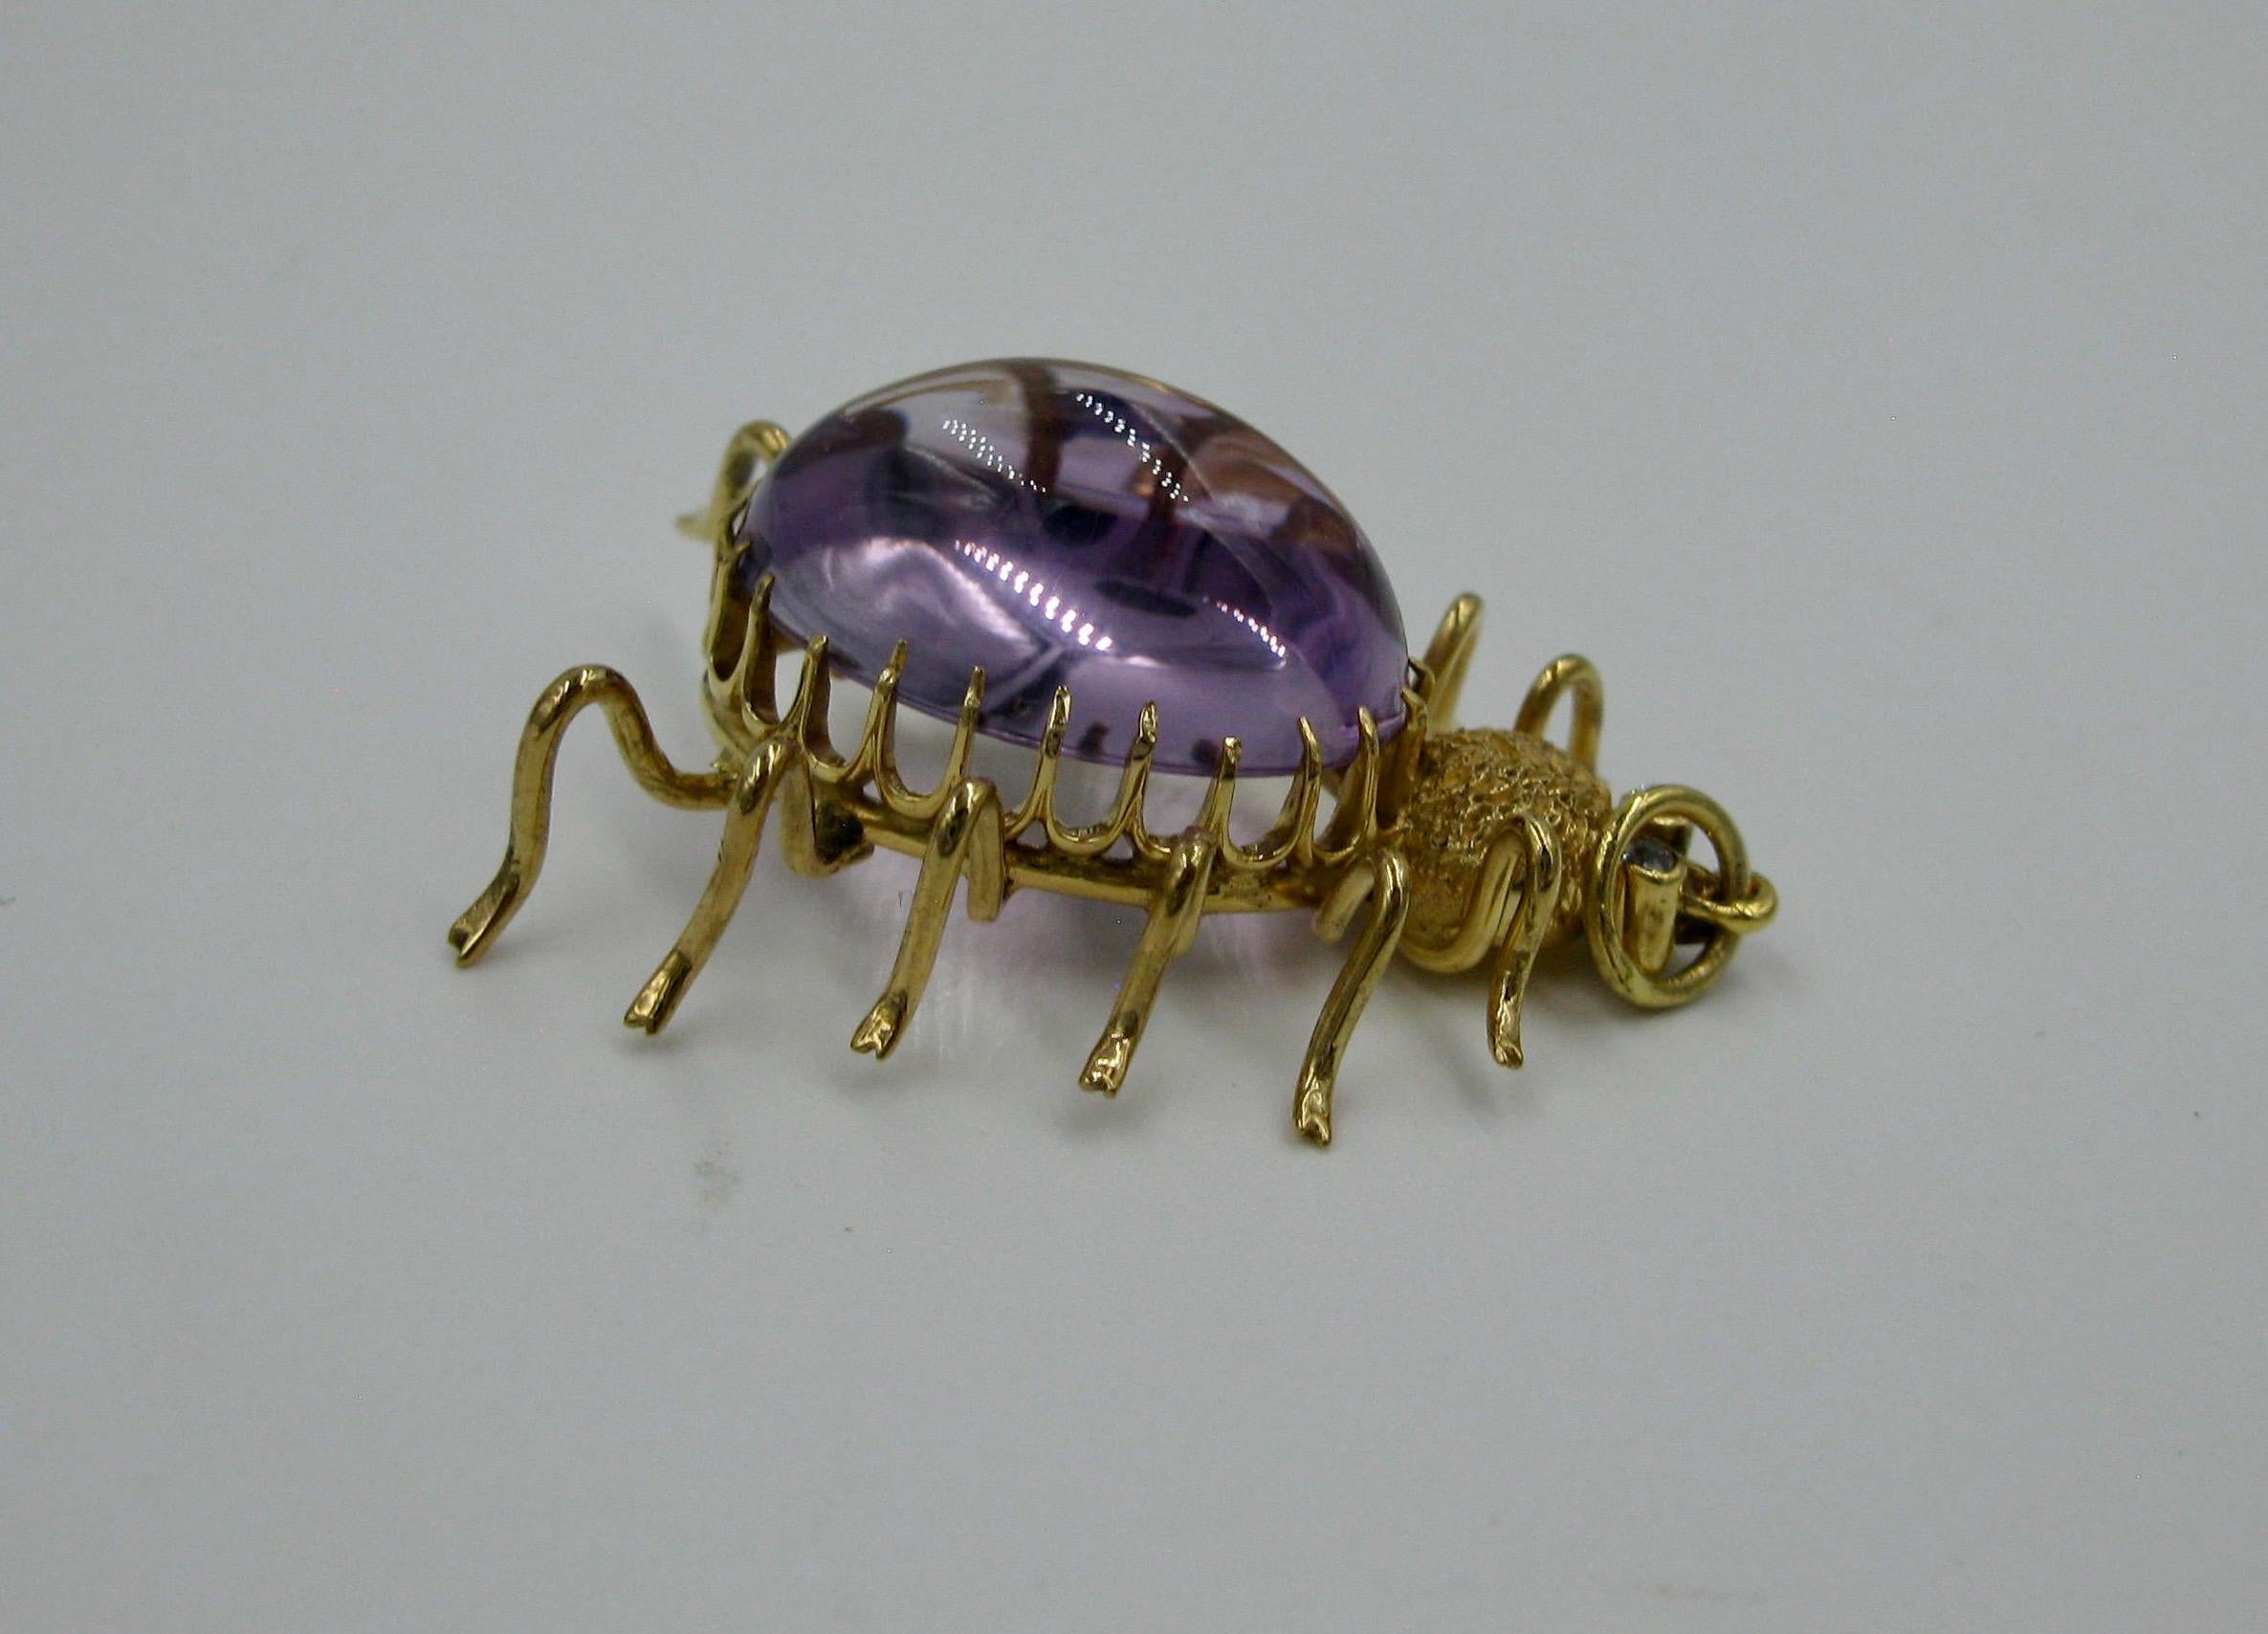 Antique 10 Carat Amethyst Diamond Spider Insect Pendant Necklace Vintage Gold In Excellent Condition For Sale In New York, NY